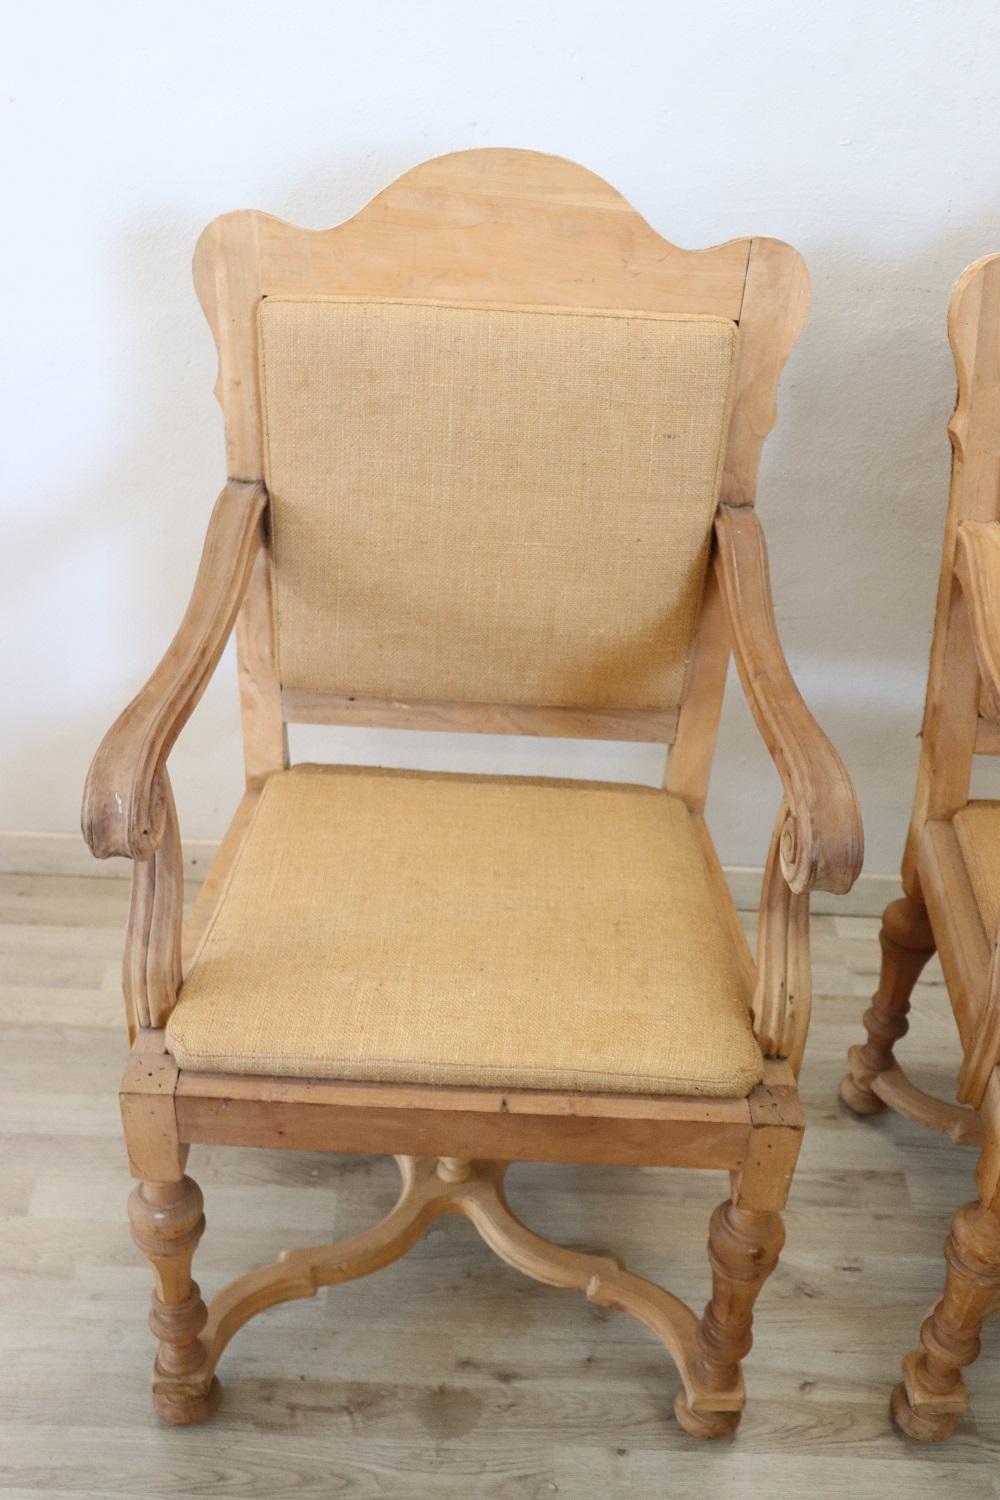 Italian Louis XIV style pair of armchairs very comfortable. Made of poplar wood with special natural wood finish without color or varnish. Perfect upholstery restored with particular use of jute. The use of natural materials without modifications or